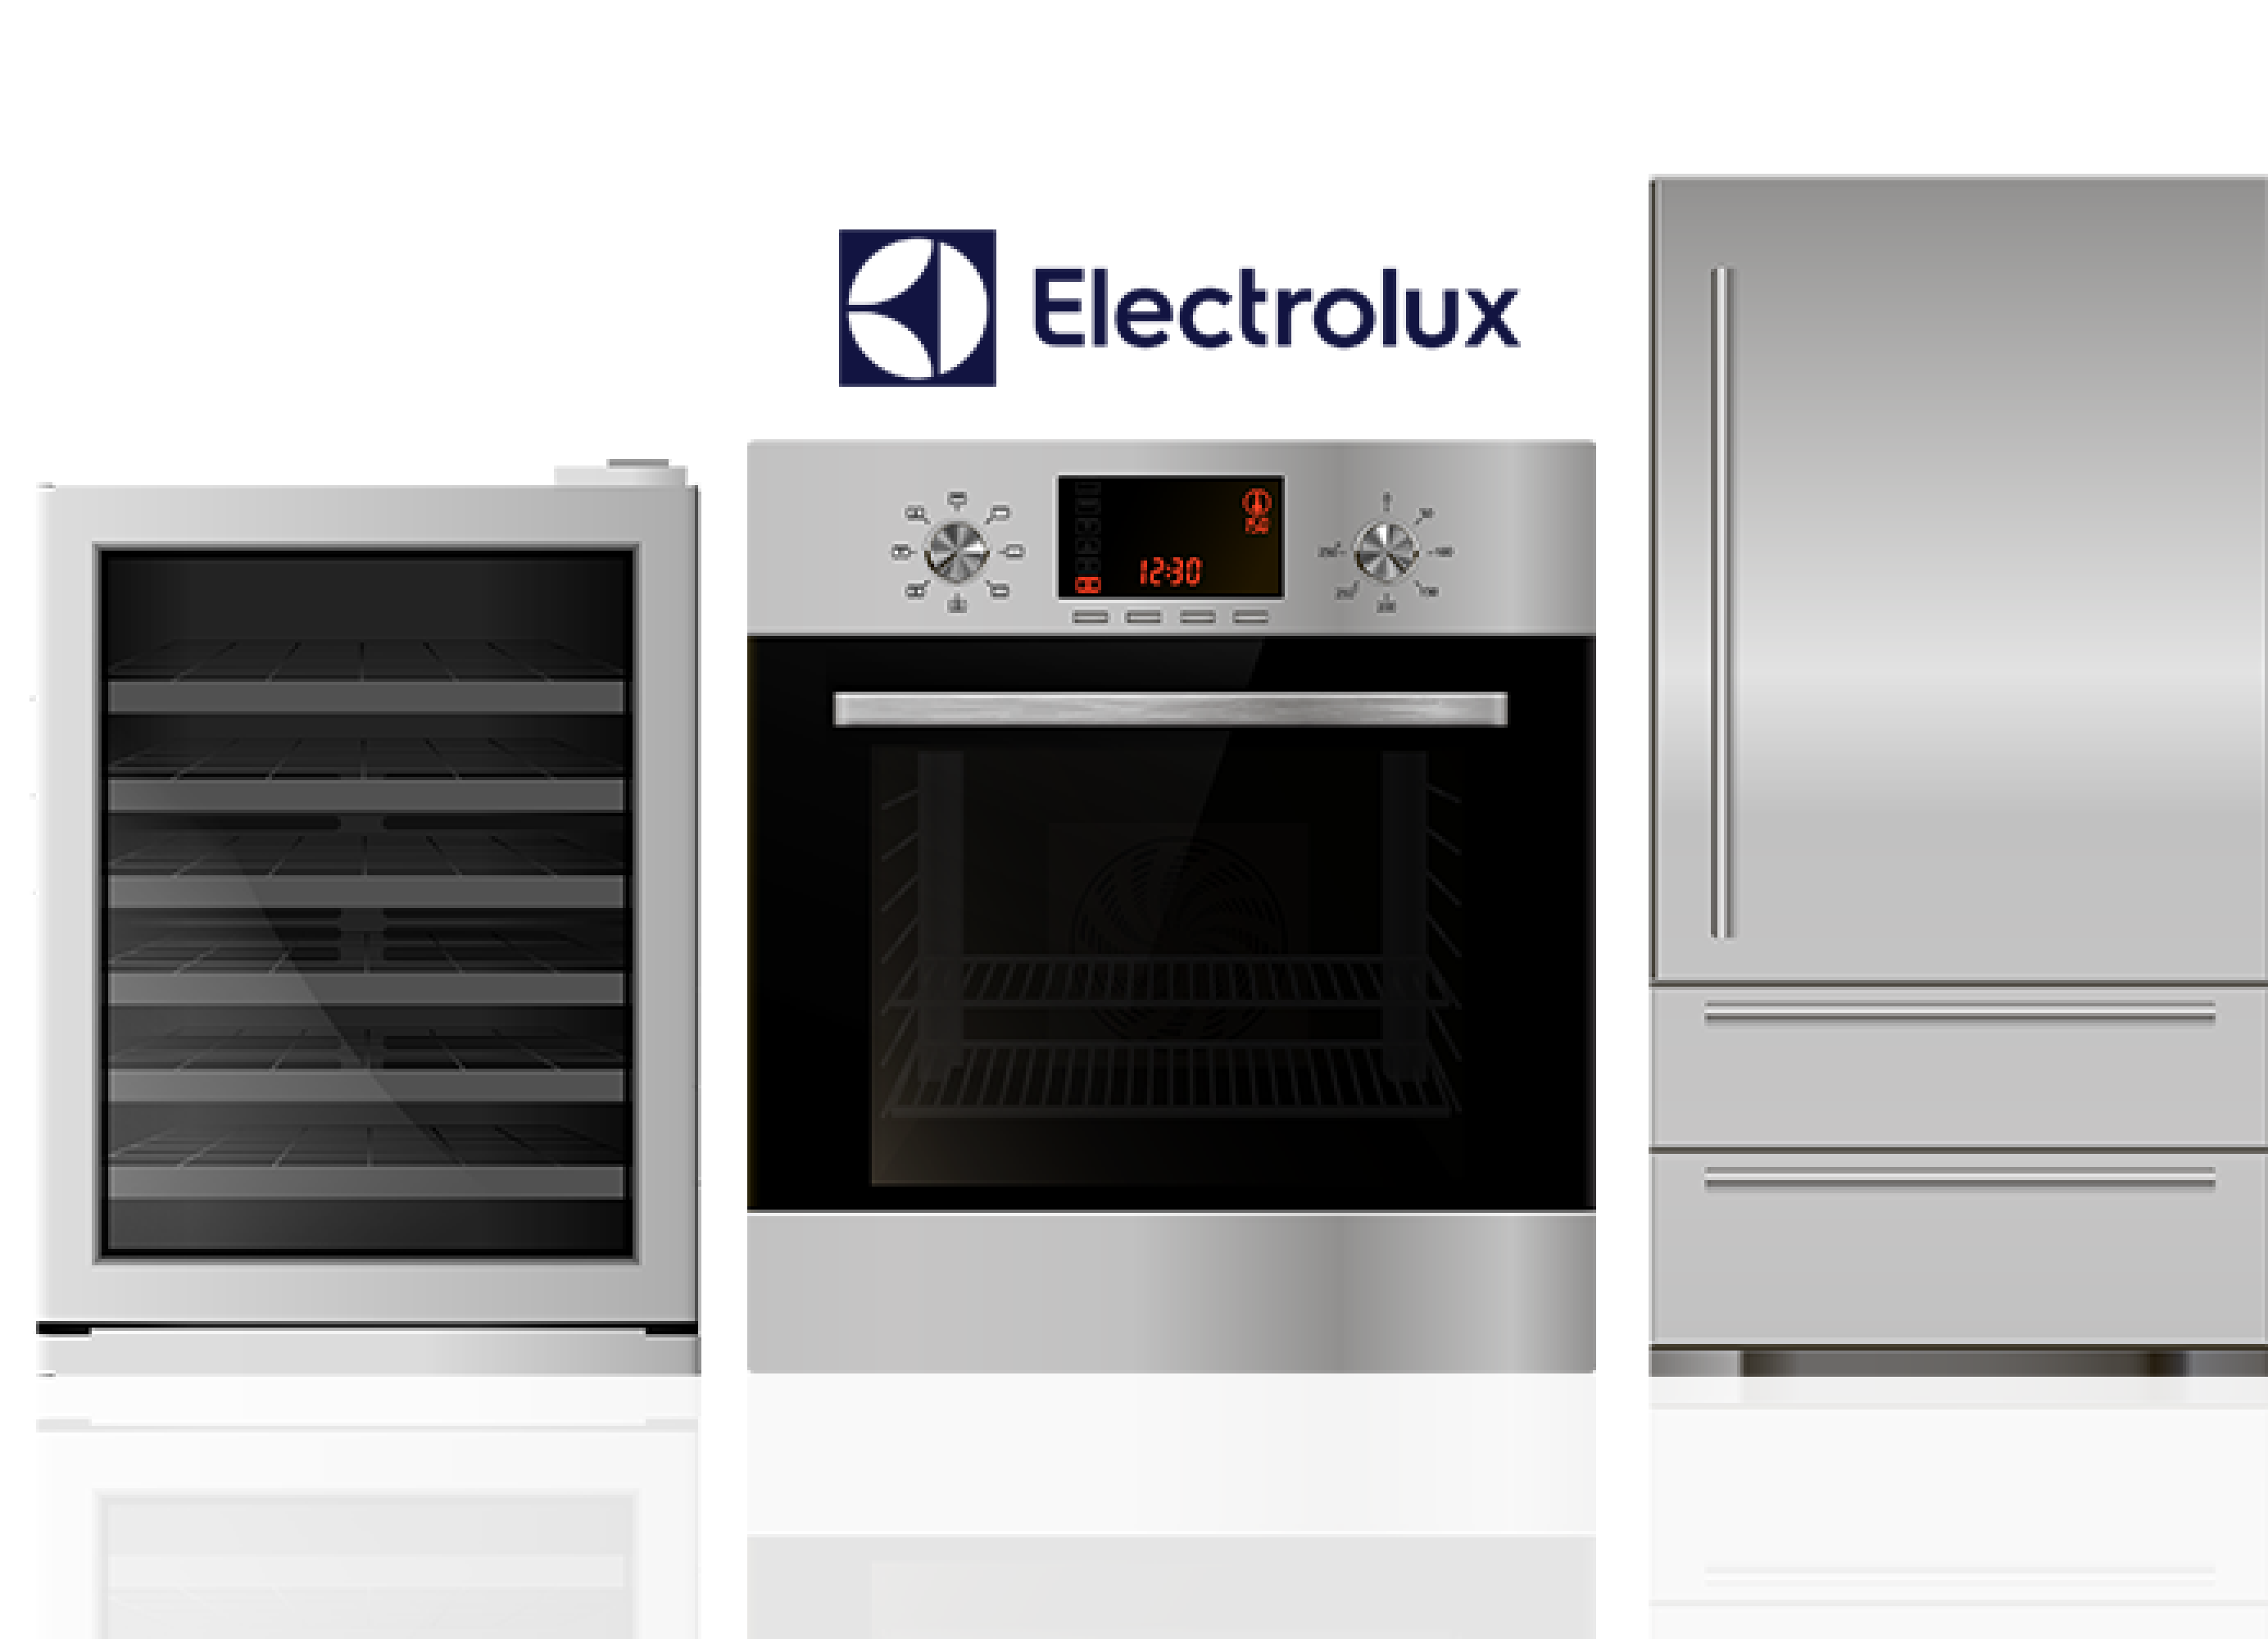 Electrolux Washer Repair Service